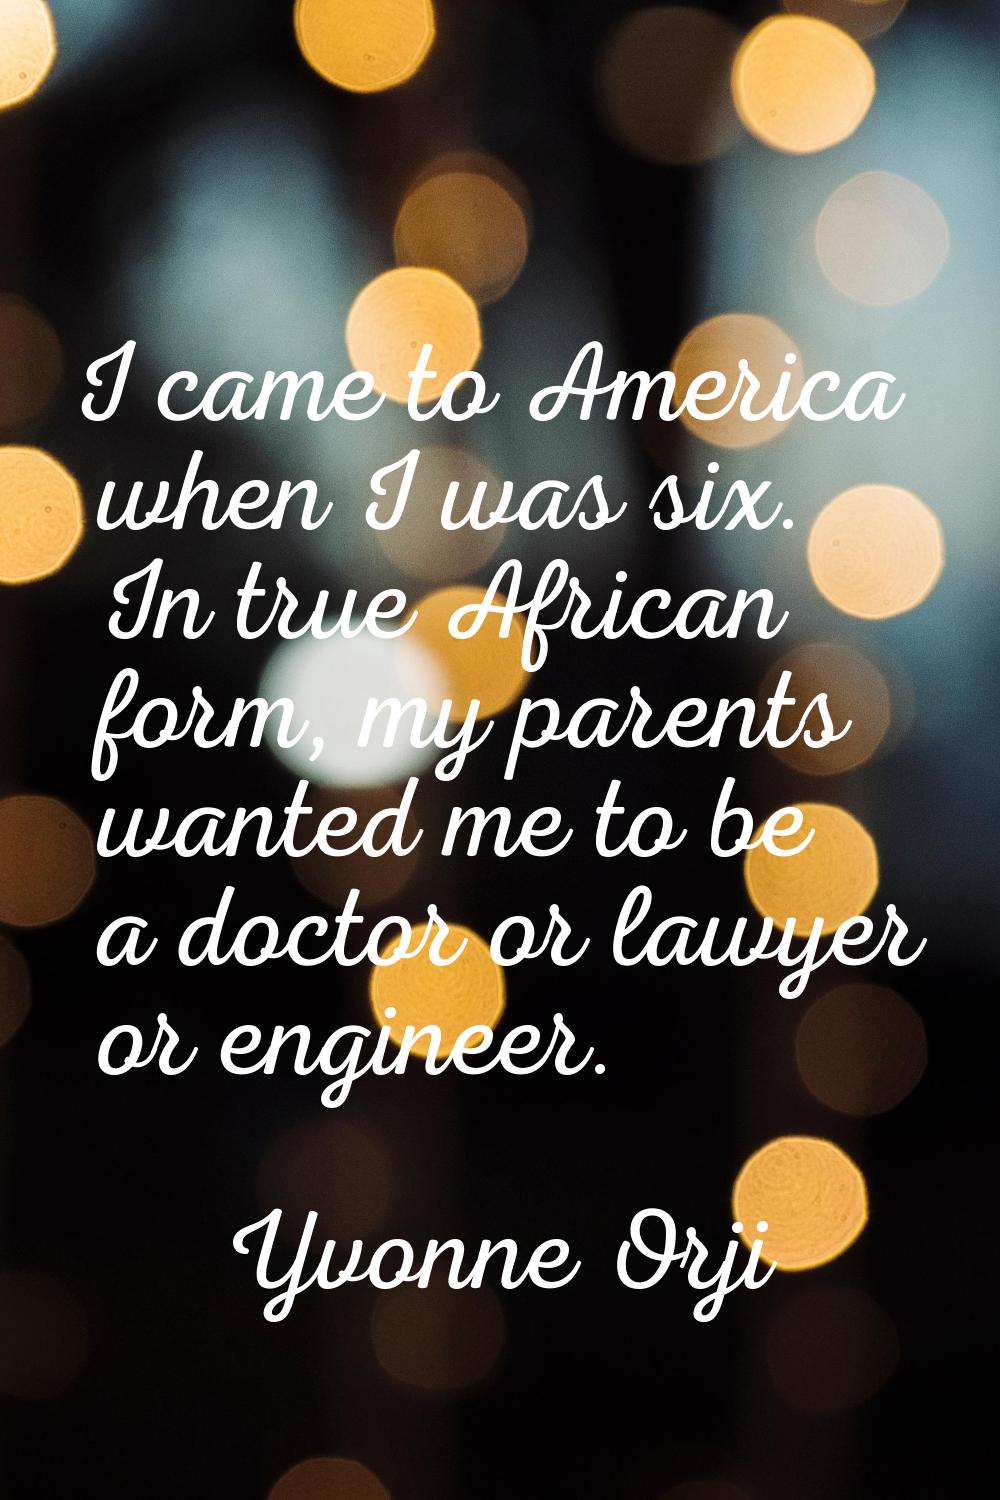 I came to America when I was six. In true African form, my parents wanted me to be a doctor or lawy